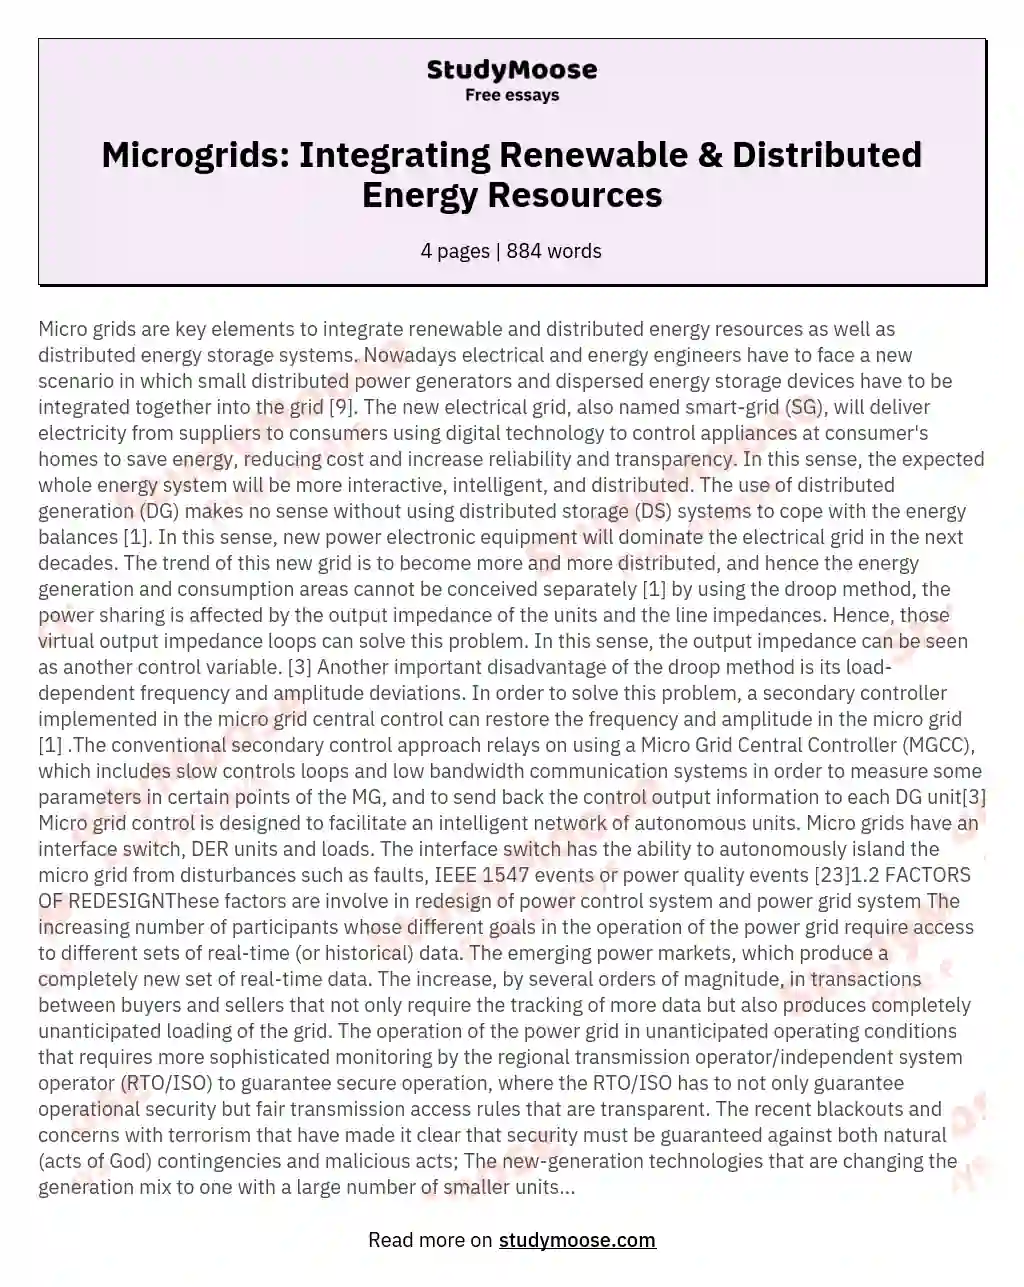 Microgrids: Integrating Renewable & Distributed Energy Resources essay